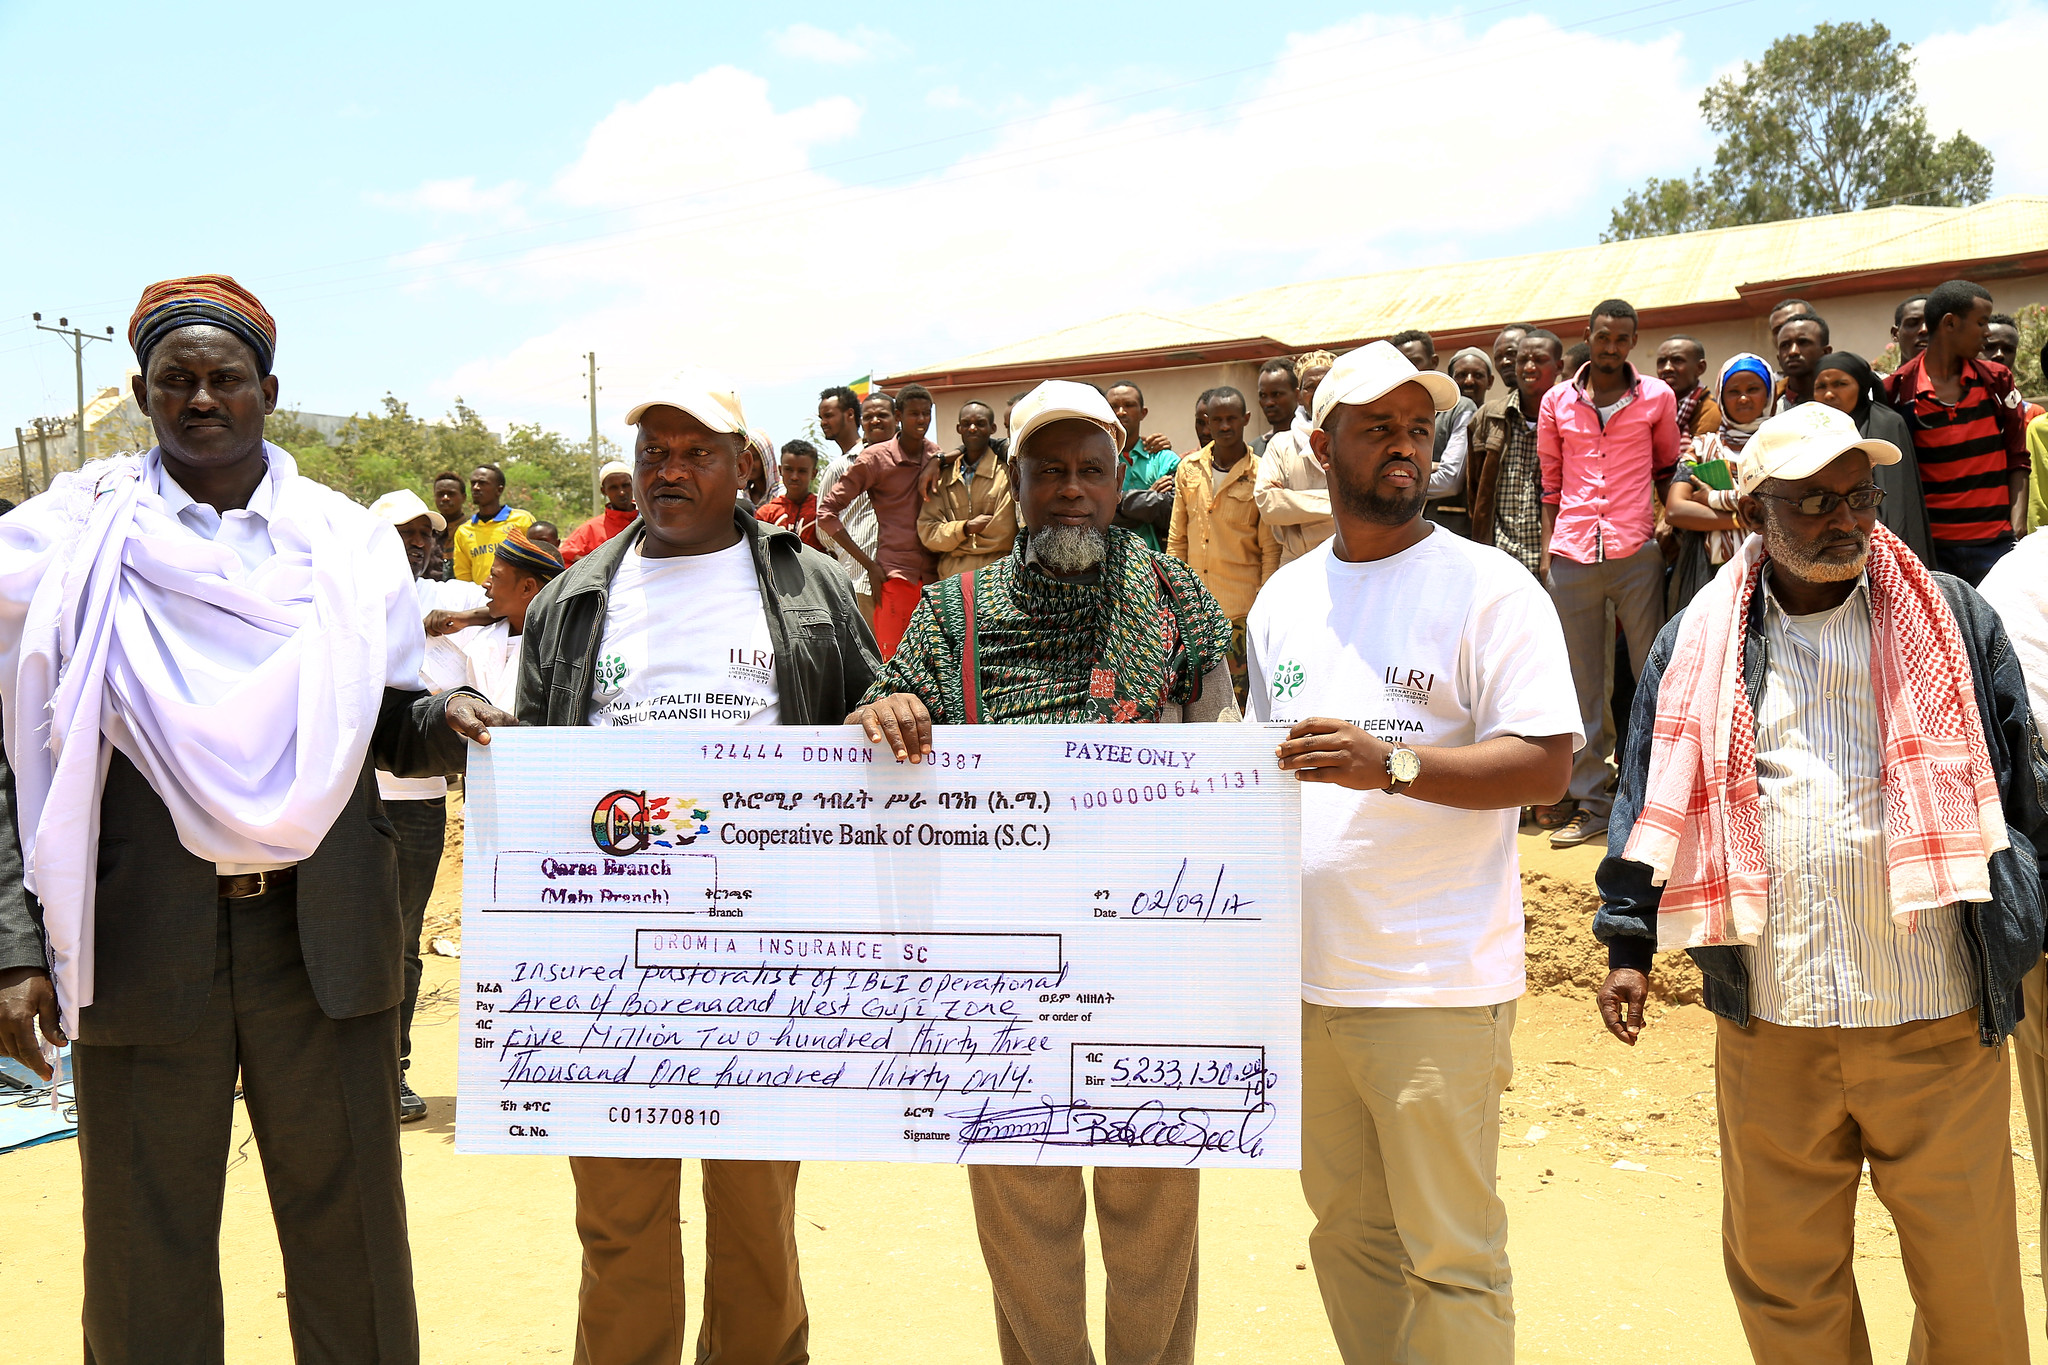 Pastoralist receive an indemnity payment after livestock losses